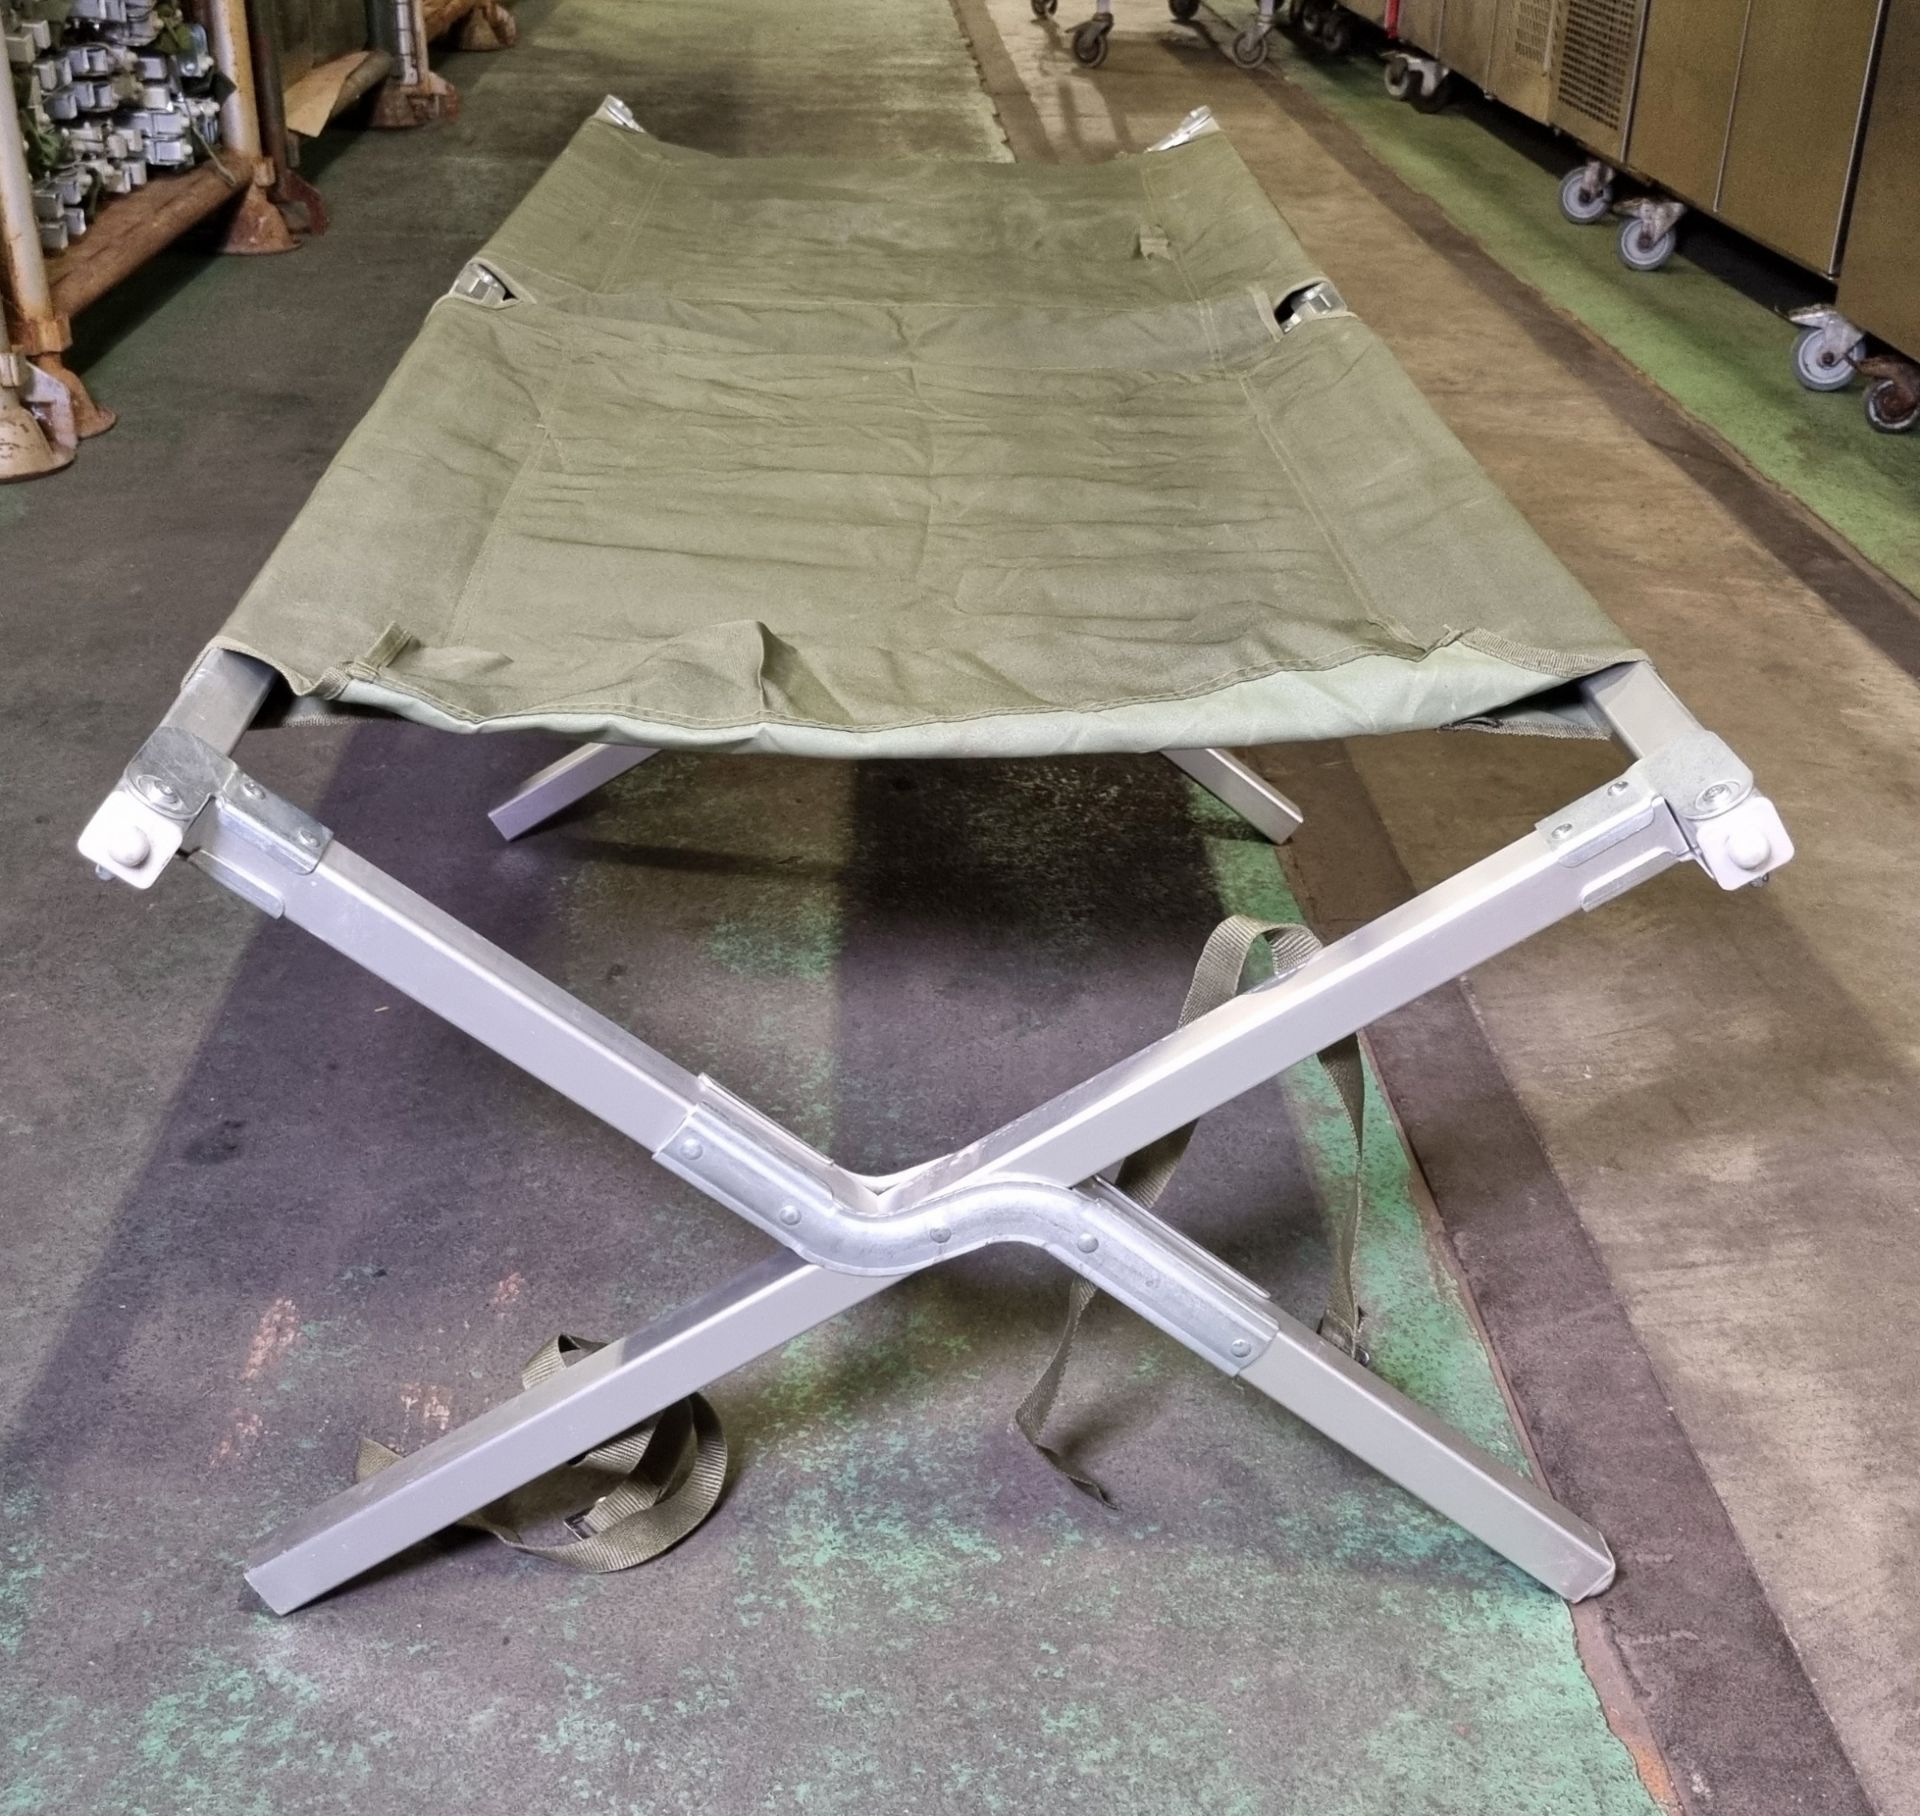 15x Folding field cots - L 1900 x W 700 x H 450mm - SPARES OR REPAIRS - Image 4 of 5